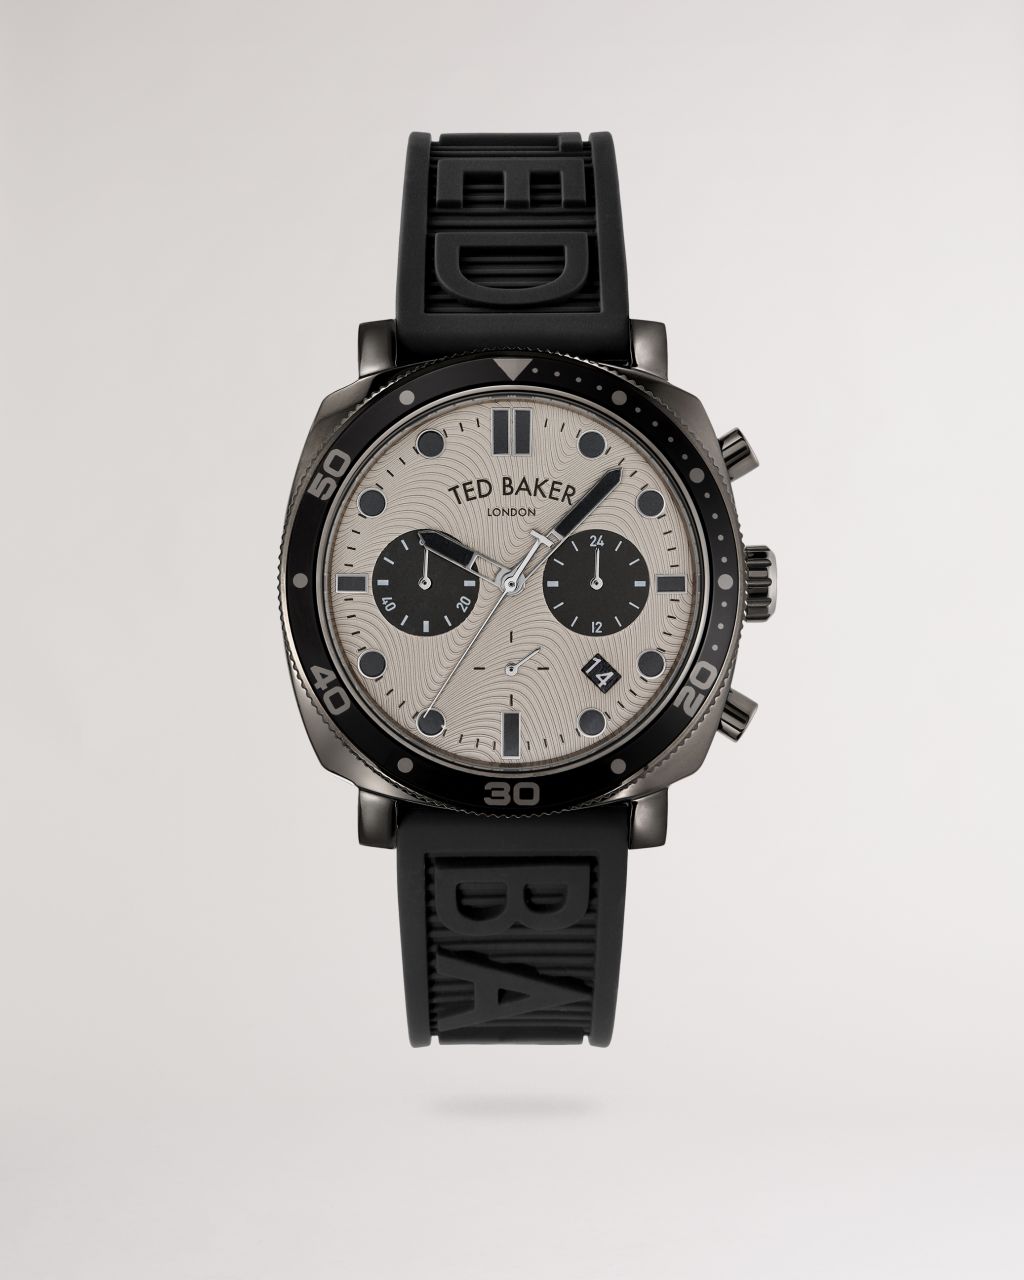 Ted Baker Silicone Strap Watch in Black SILCN, Men's Accessories